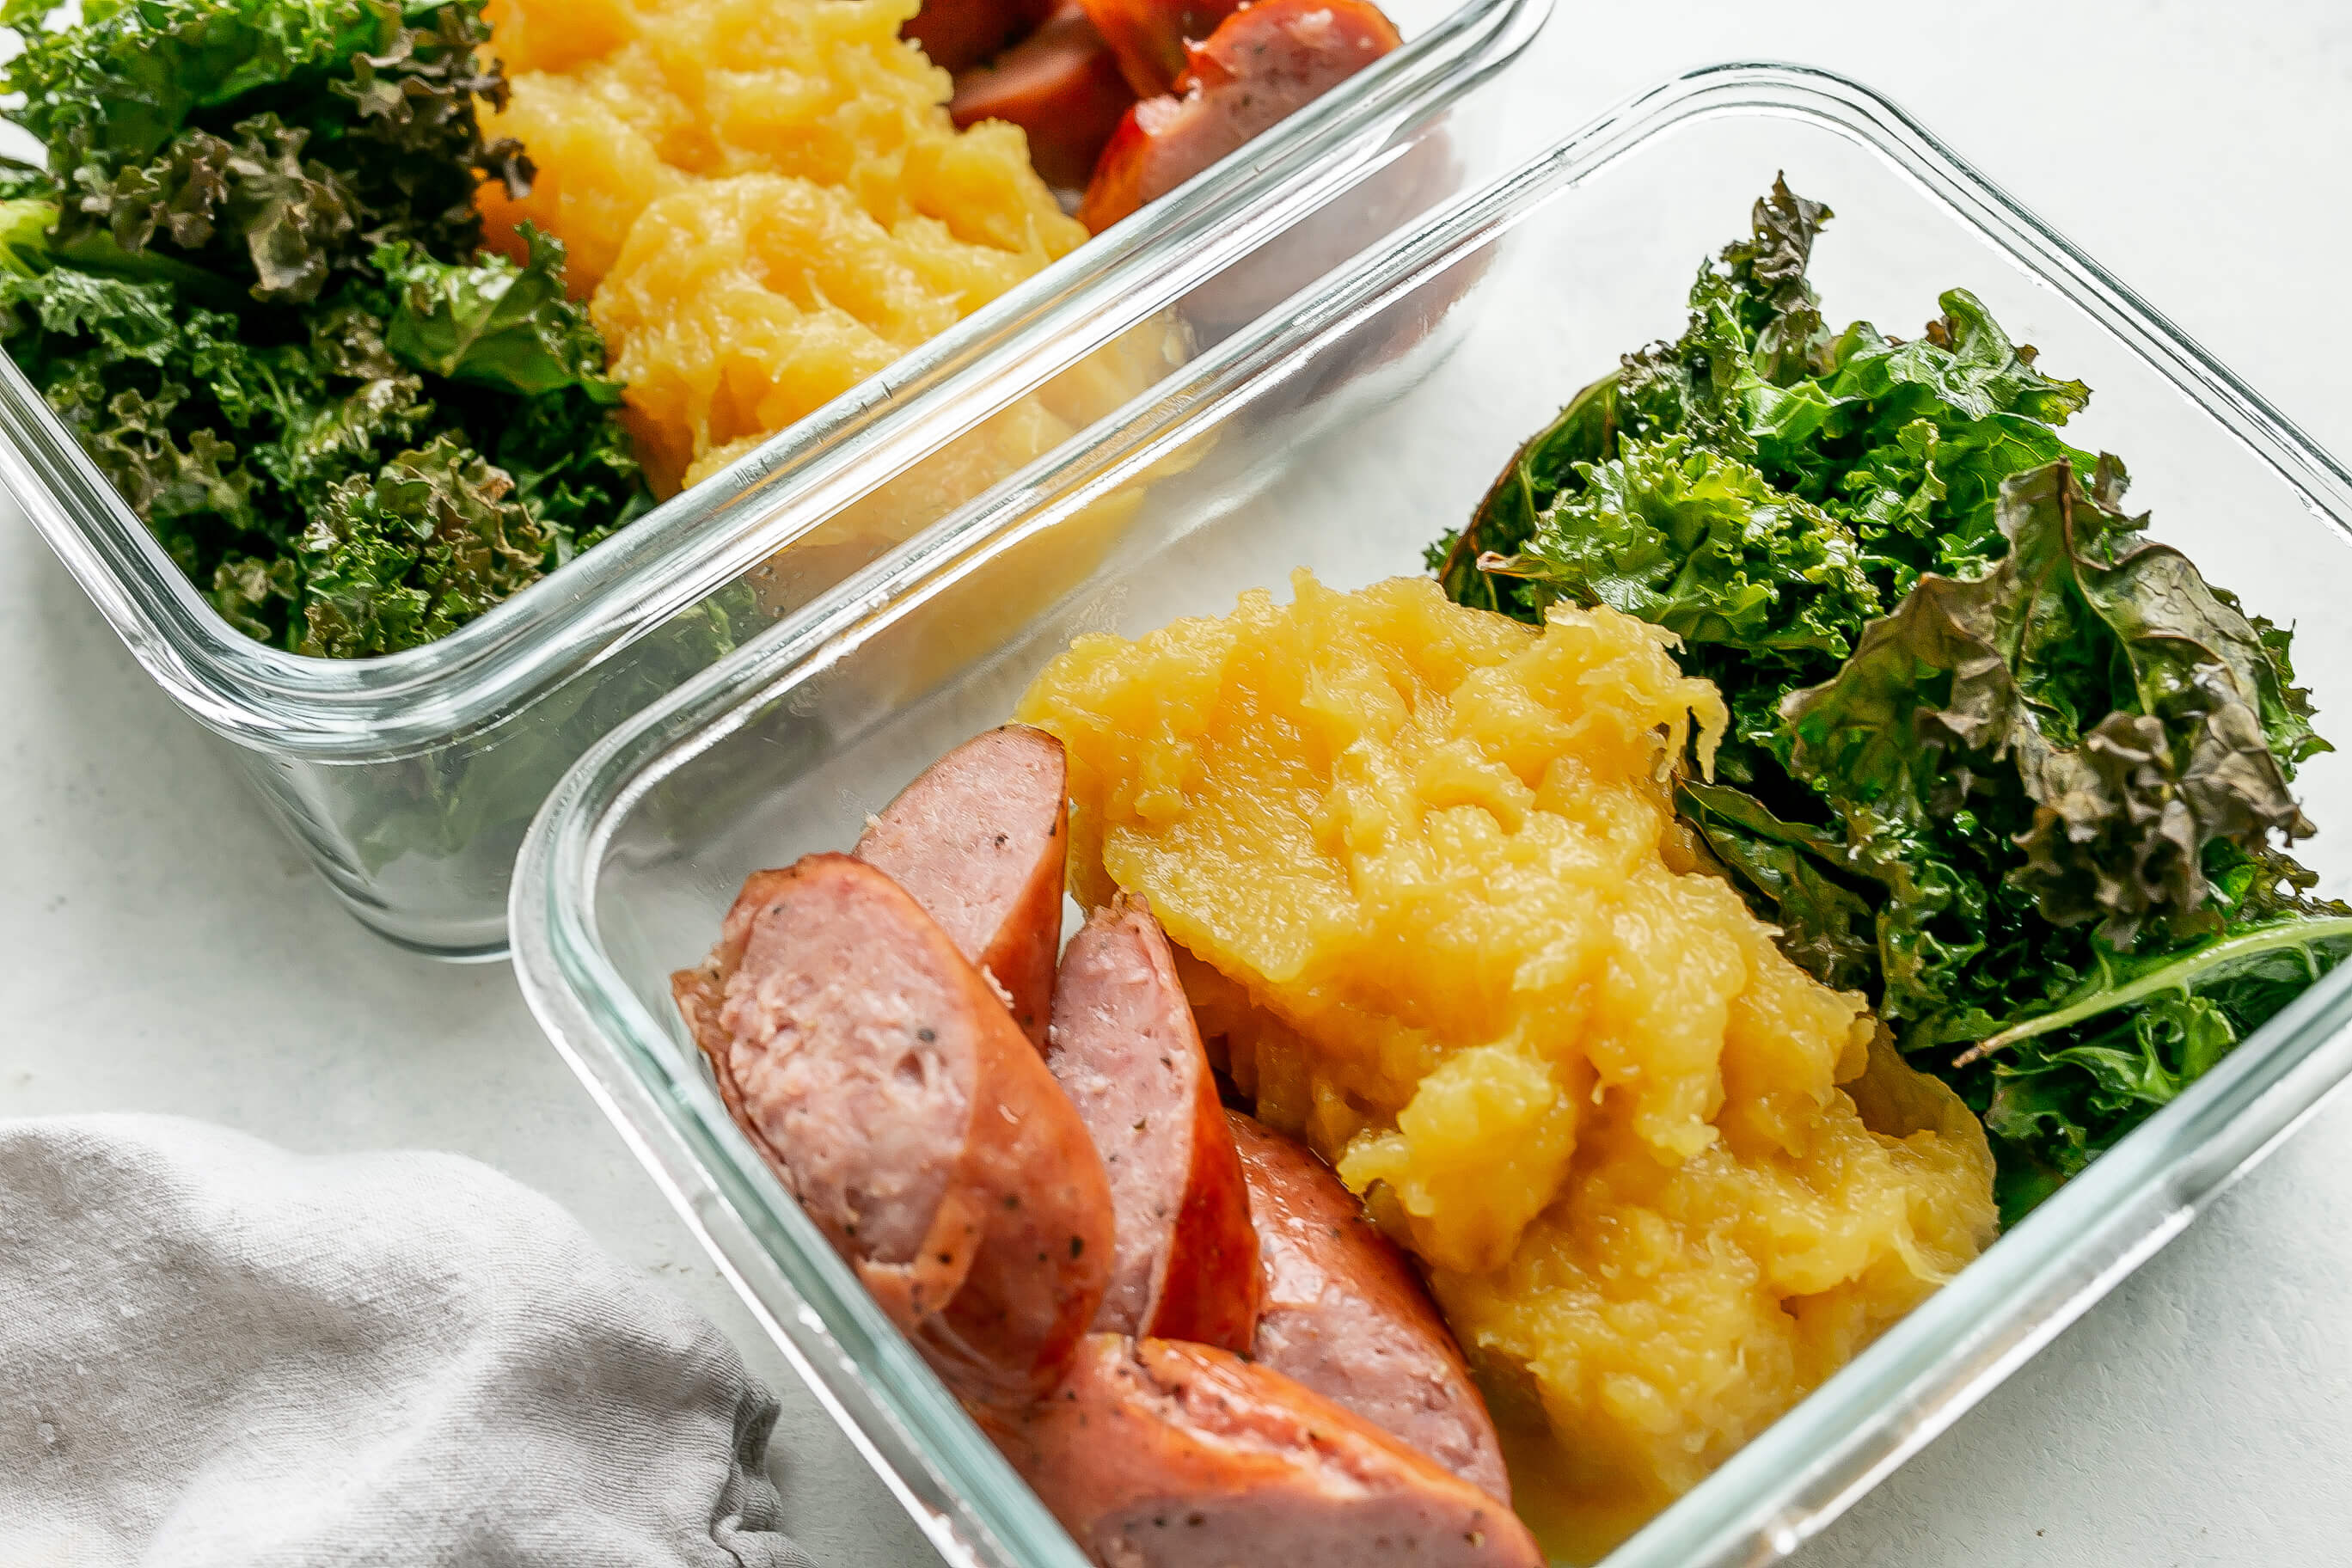 20 Simple Meals to Help Your Clients Hit Their Macros: Sausage, Kale & Acorn Squash Mash